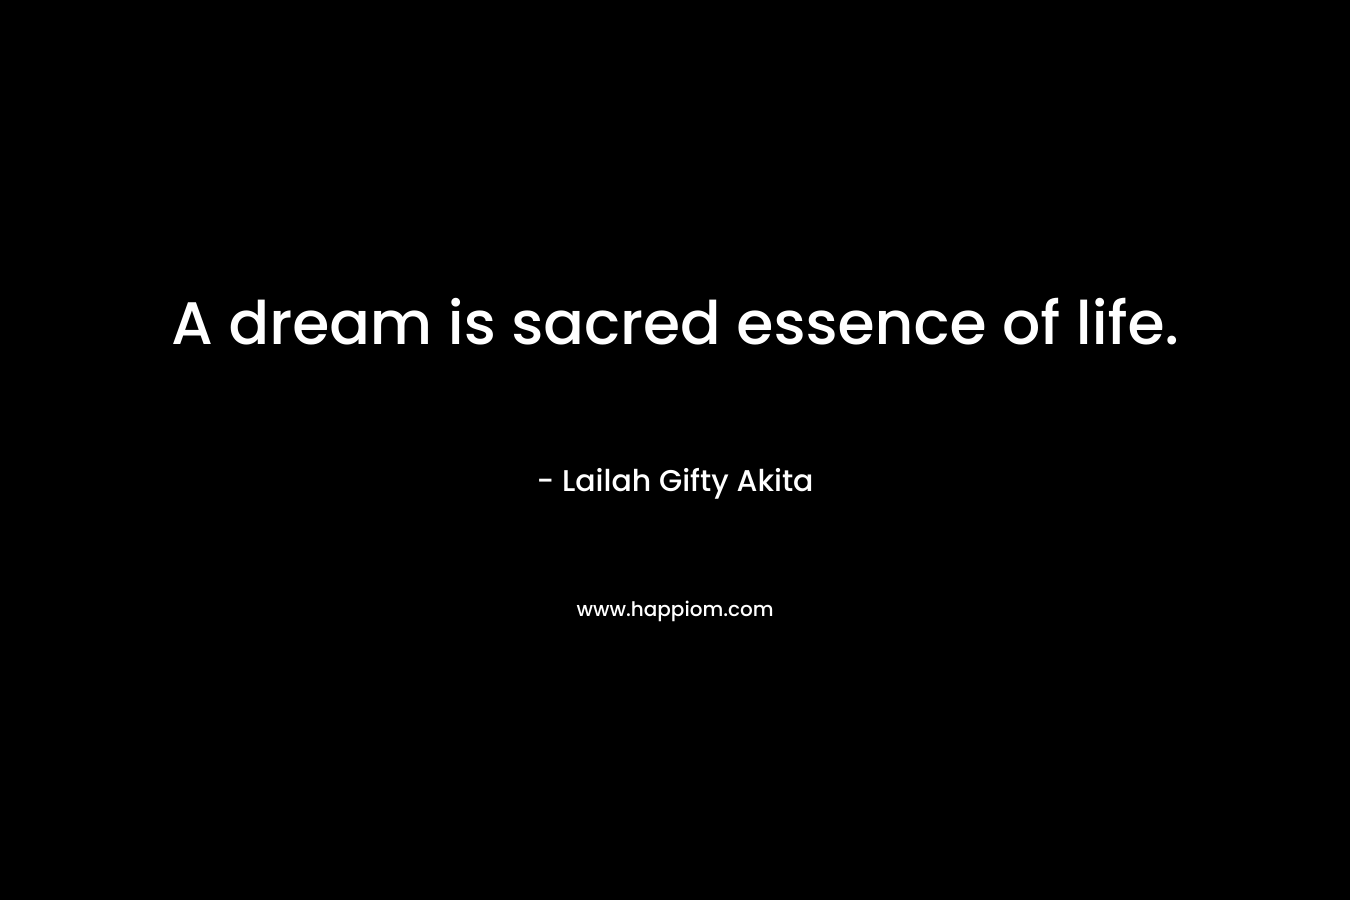 A dream is sacred essence of life.